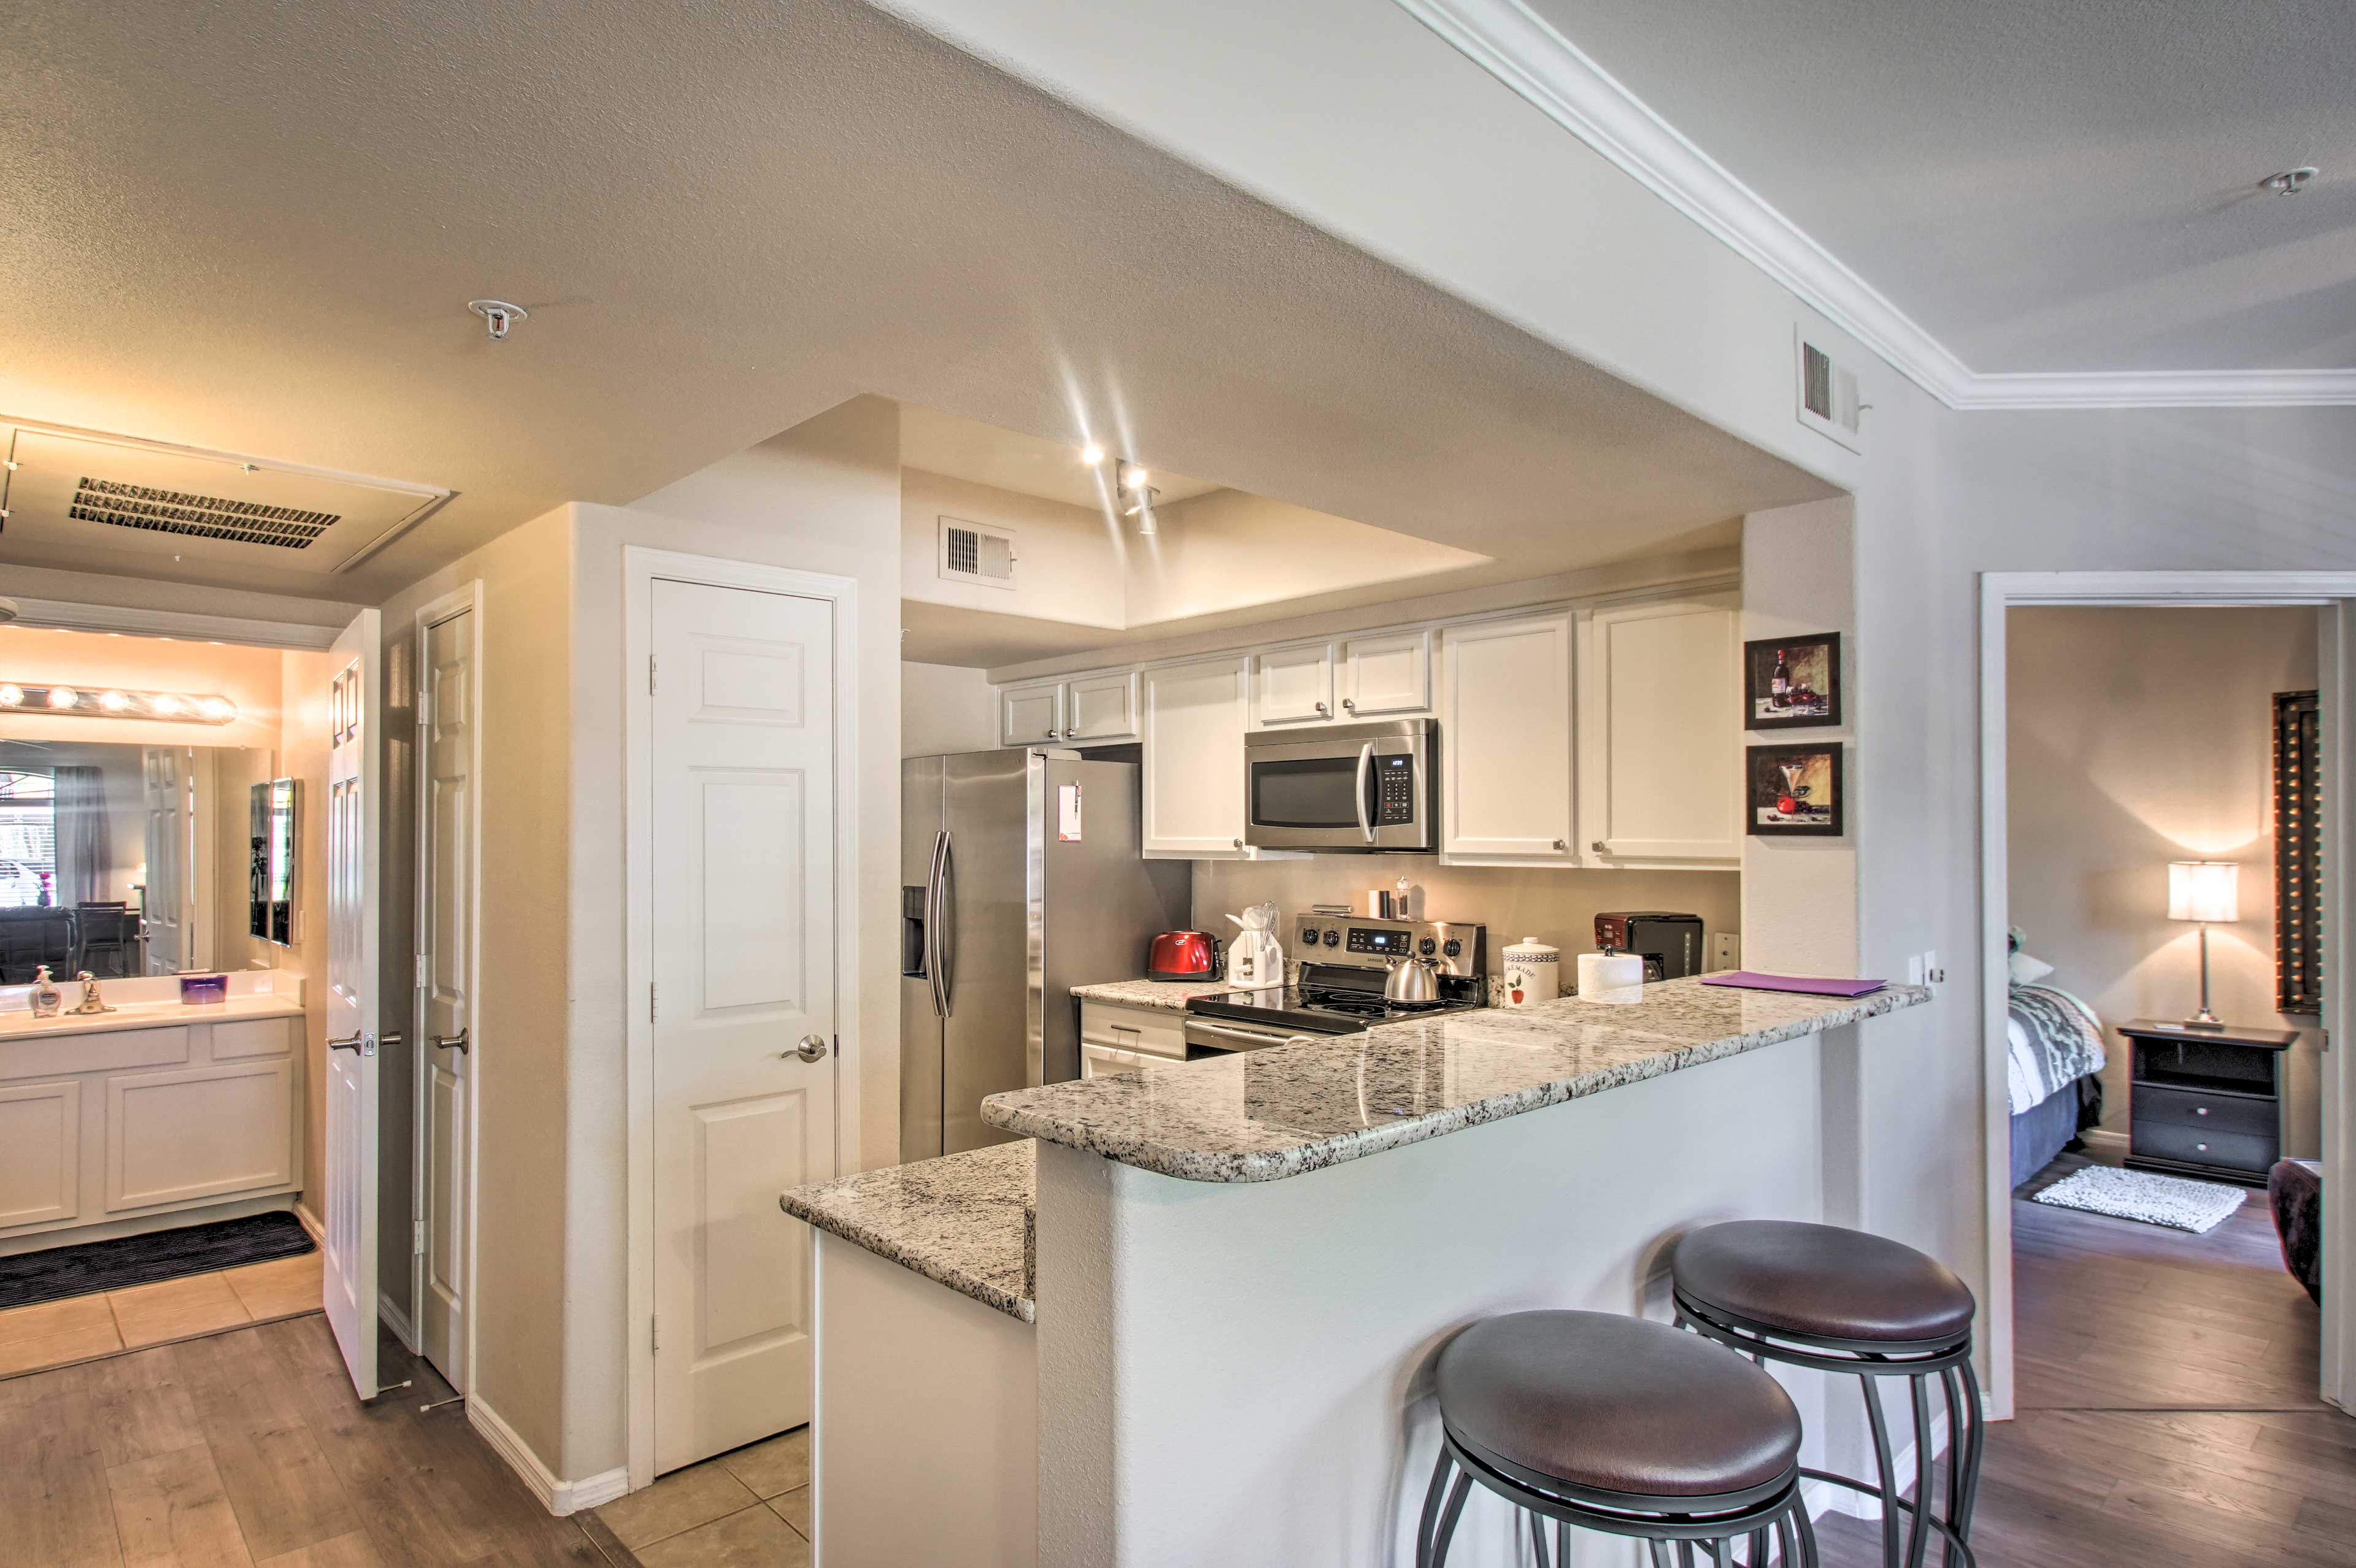 This vacation rental offers essentials like a fully equipped kitchen, and more!